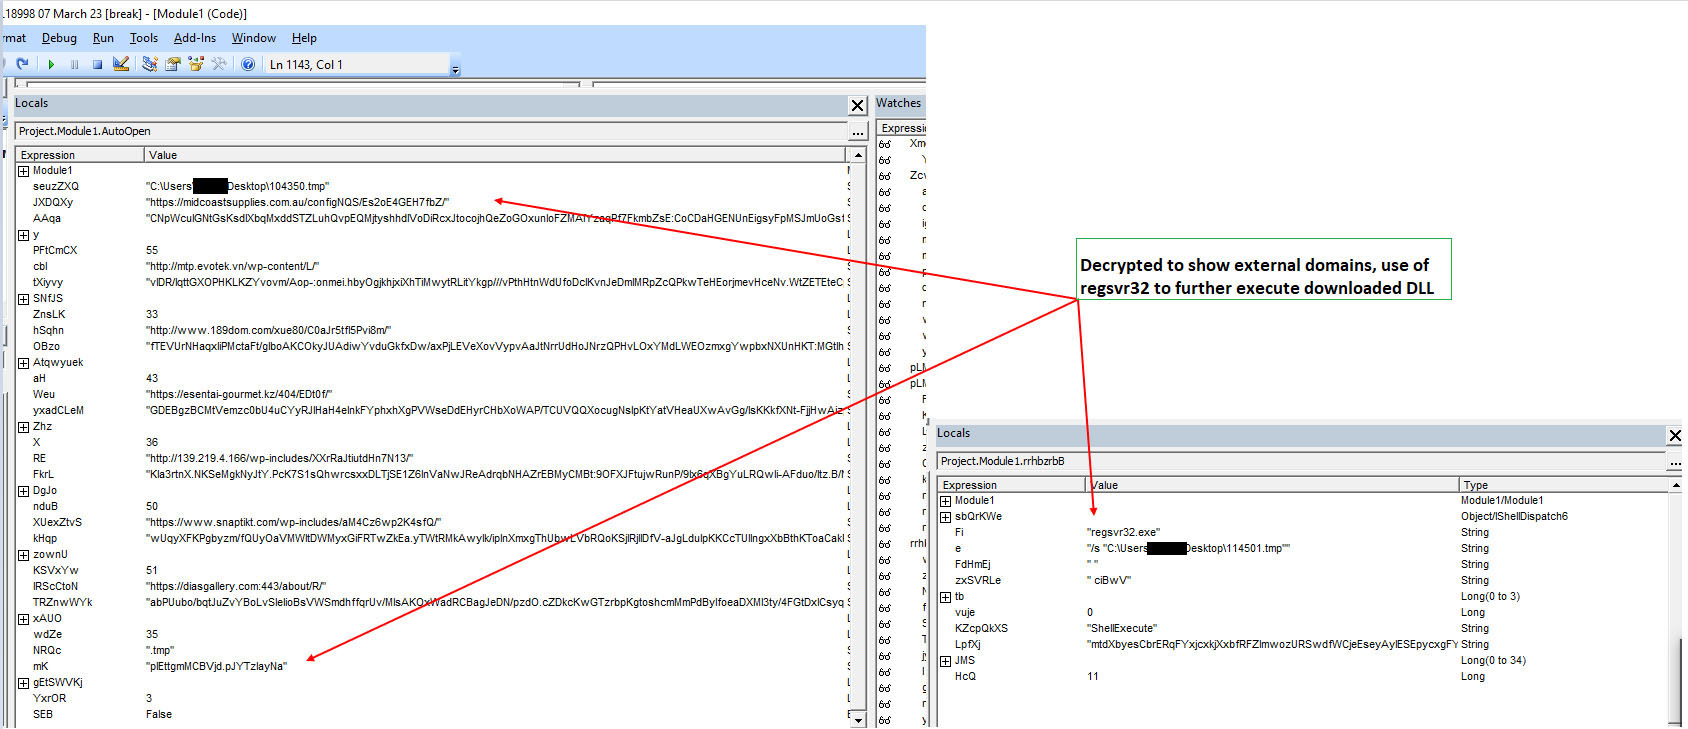 Figure 9: Macros decrypted to show contacted domains and usage of regsvr32.